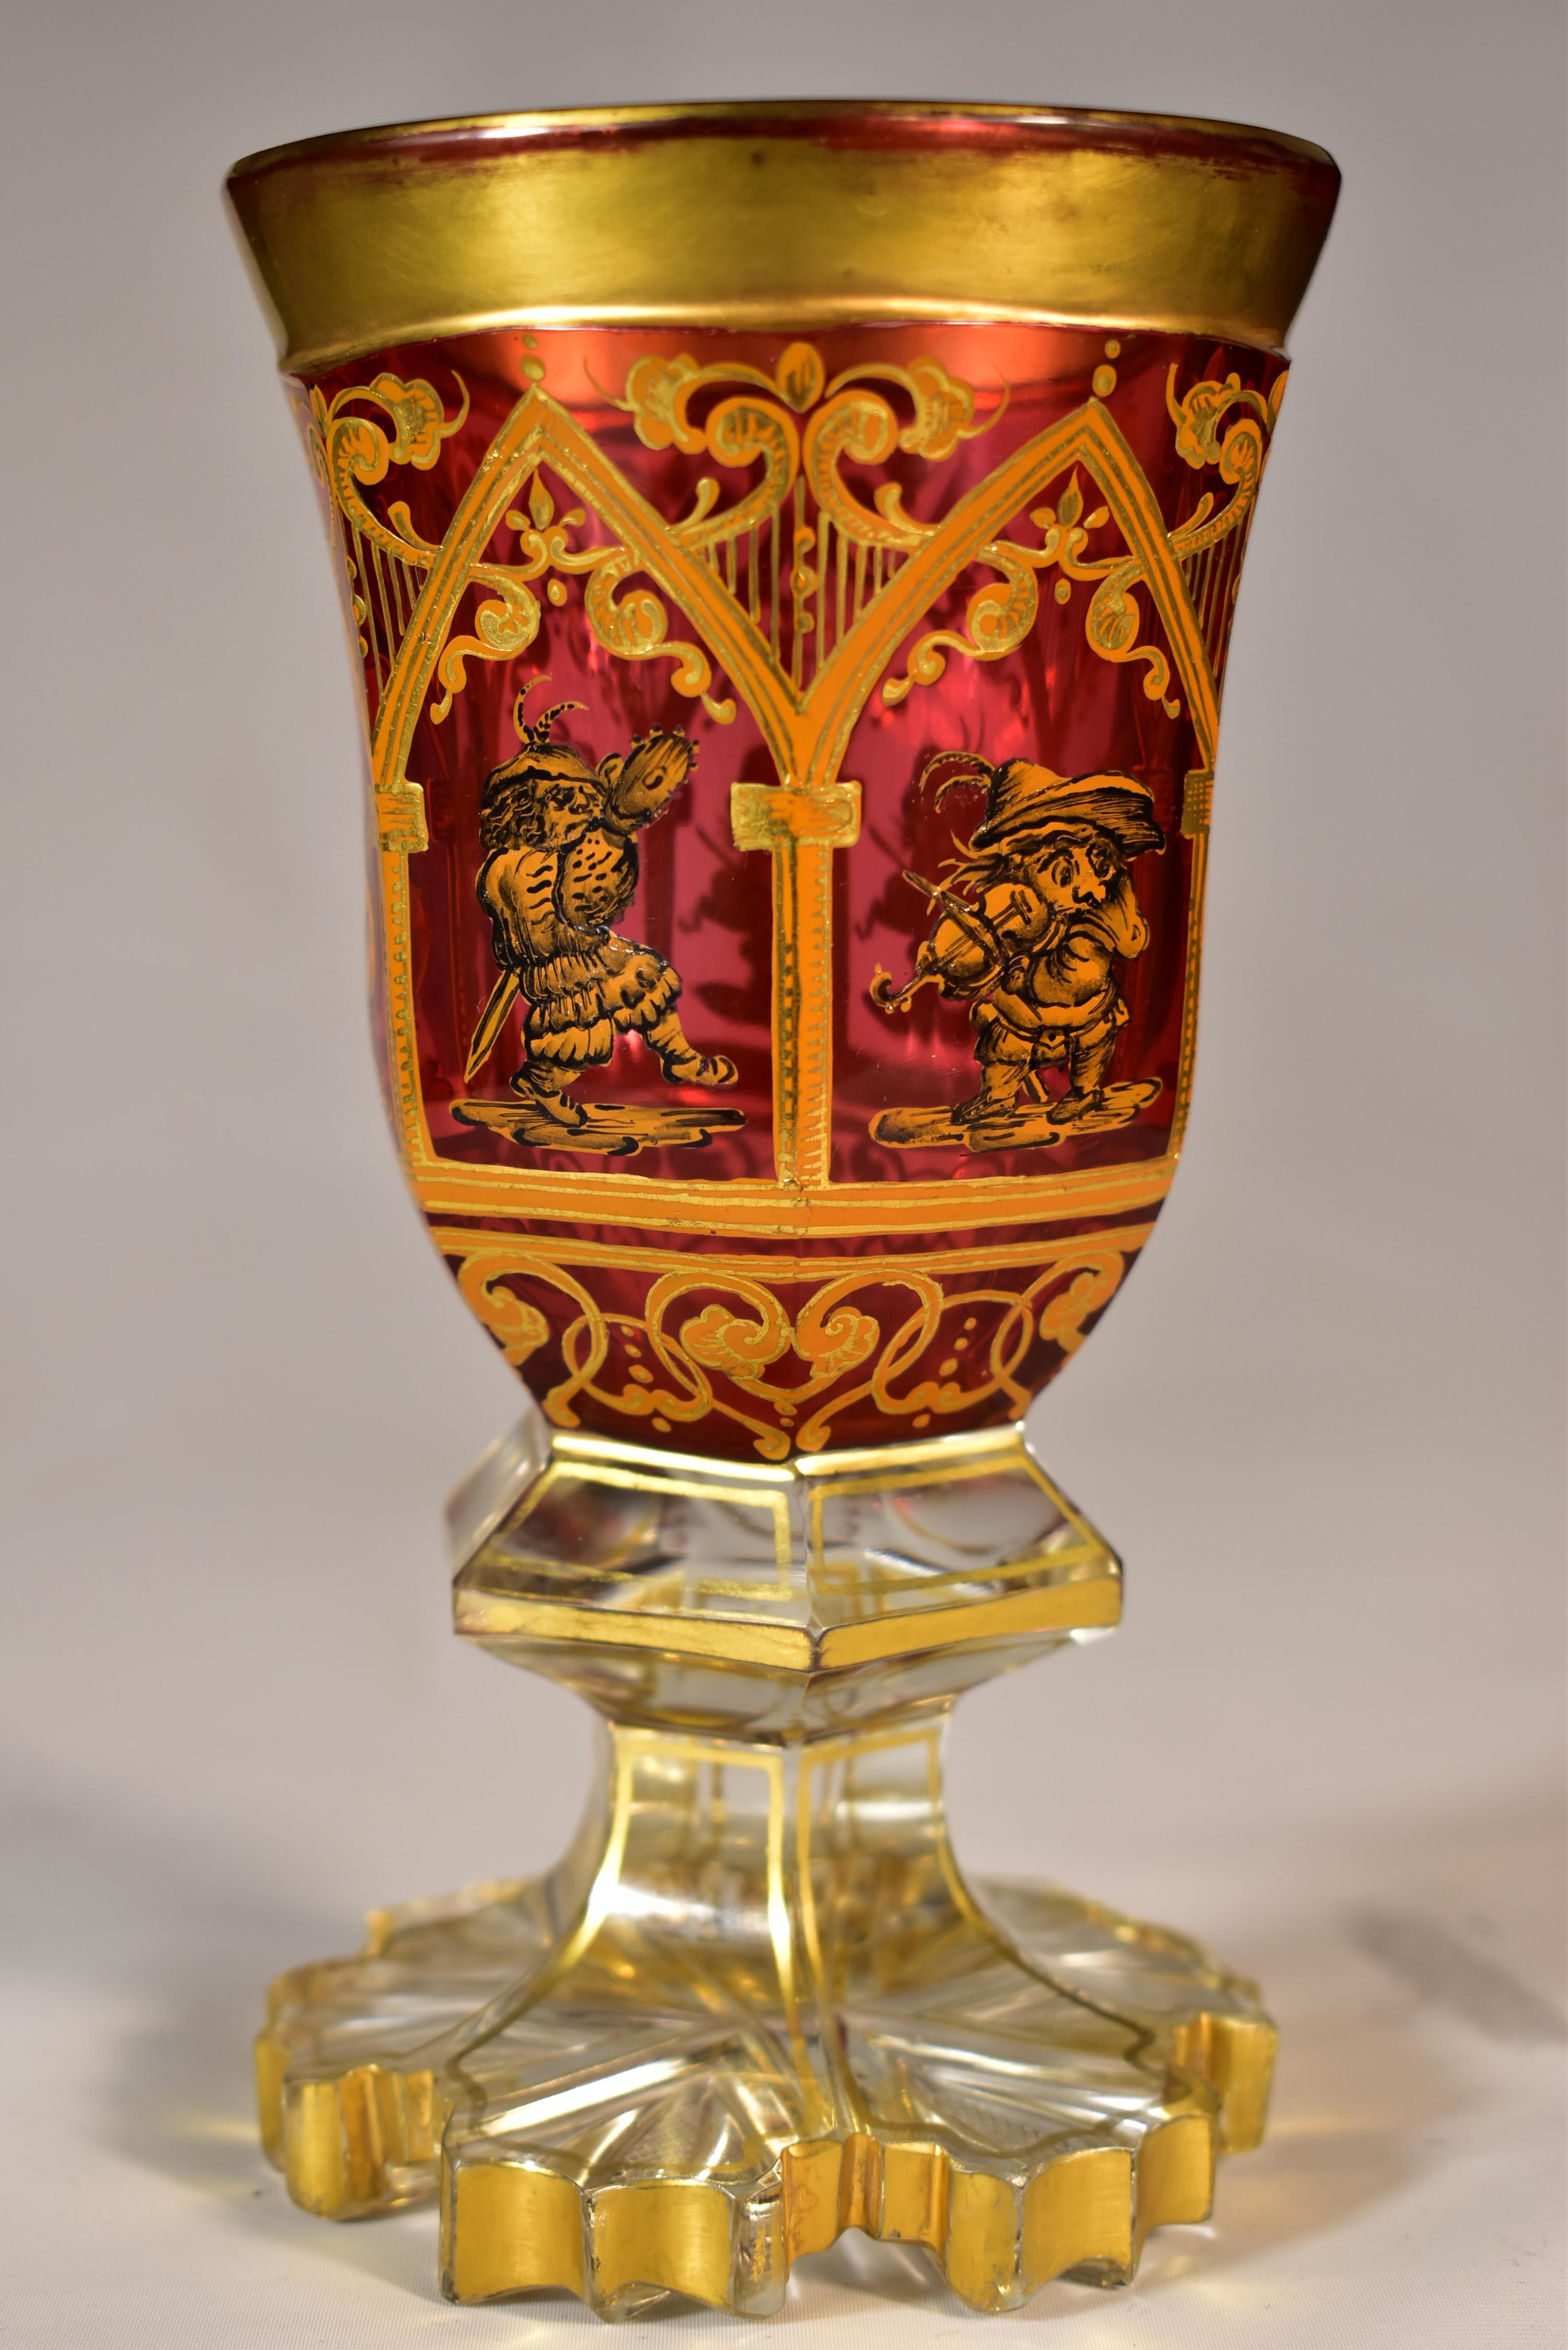 Czech Antique Ruby Goblet - Painted 19th century Bohemian Glass For Sale